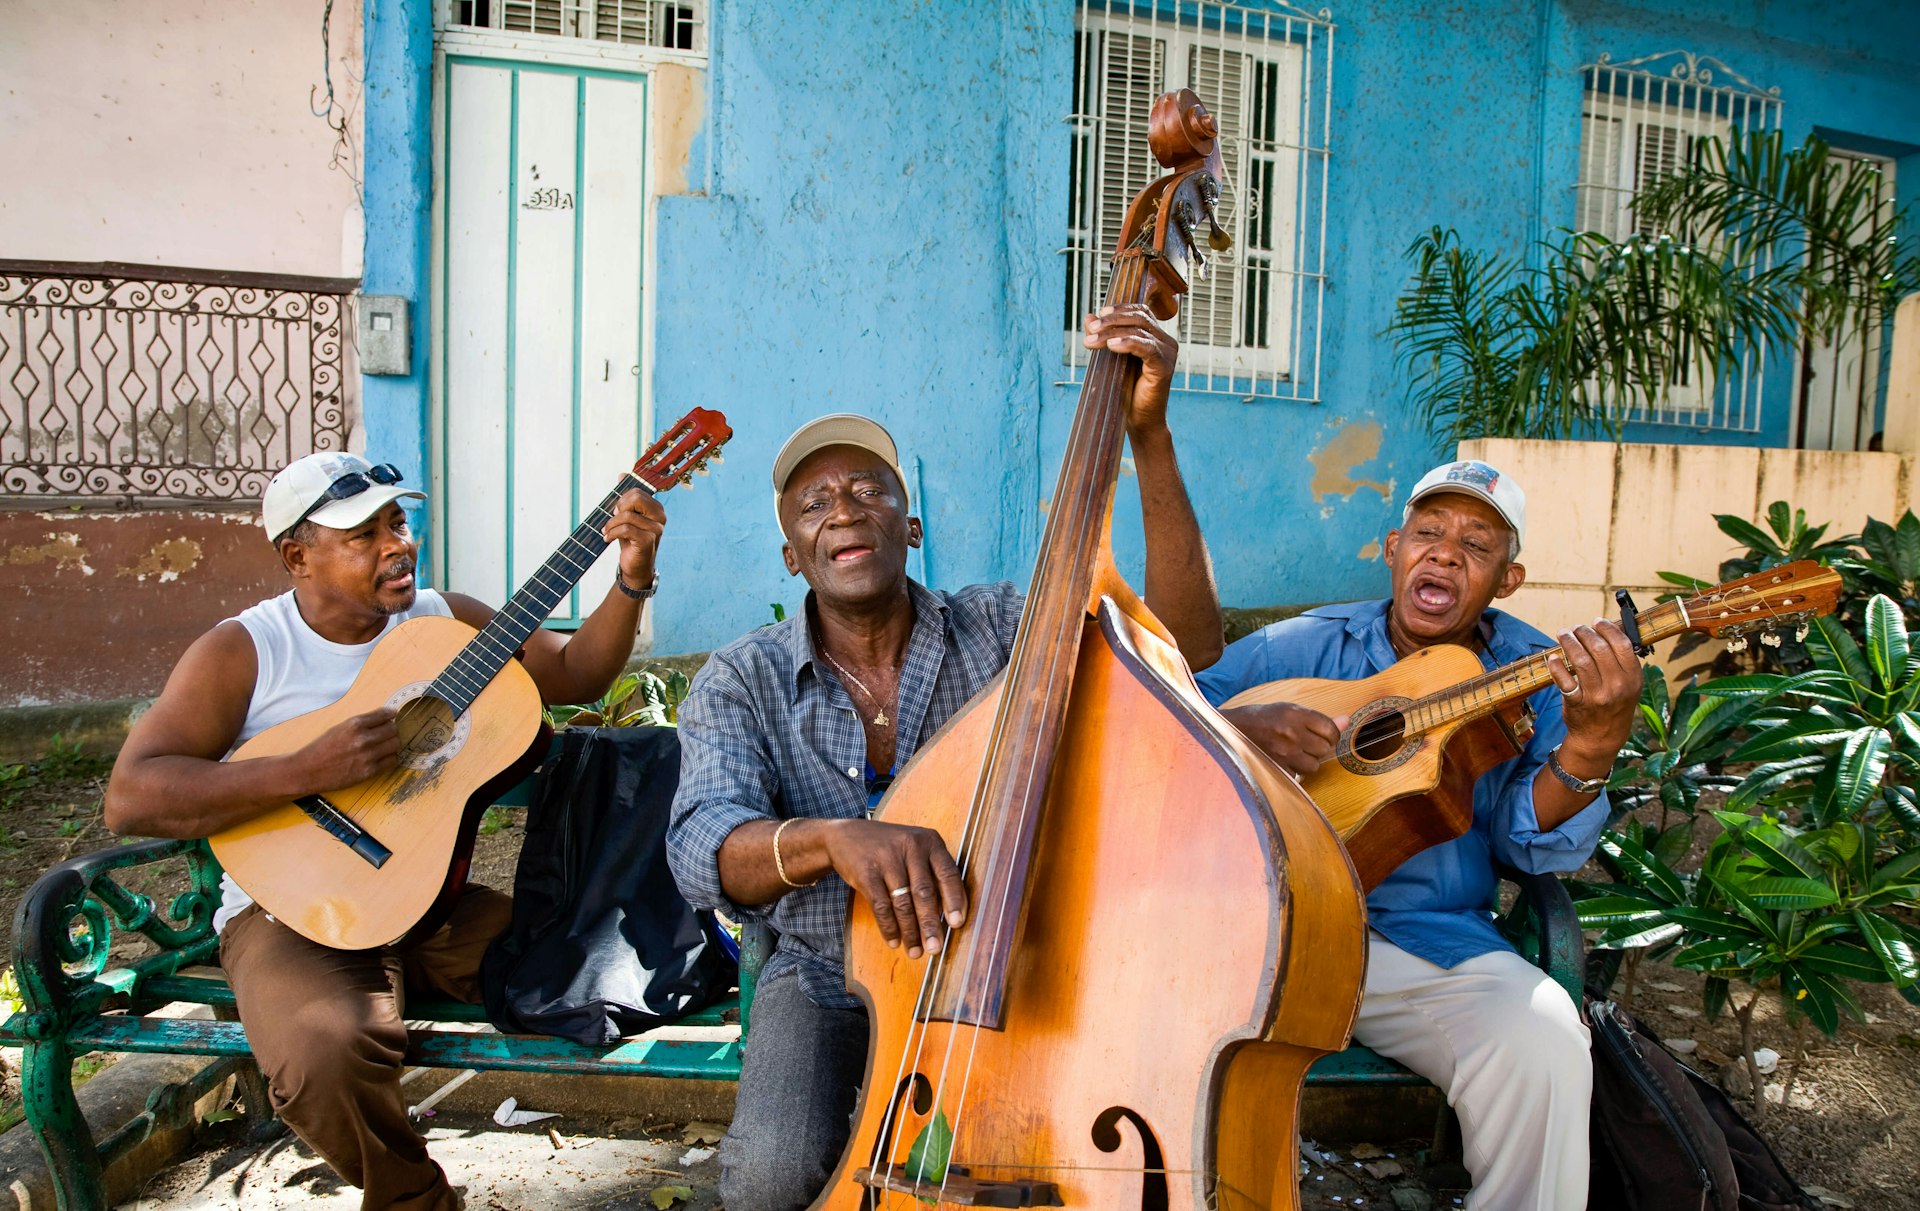 Three musicians sitting on a bench and playing music on a street in Santiago de Cuba